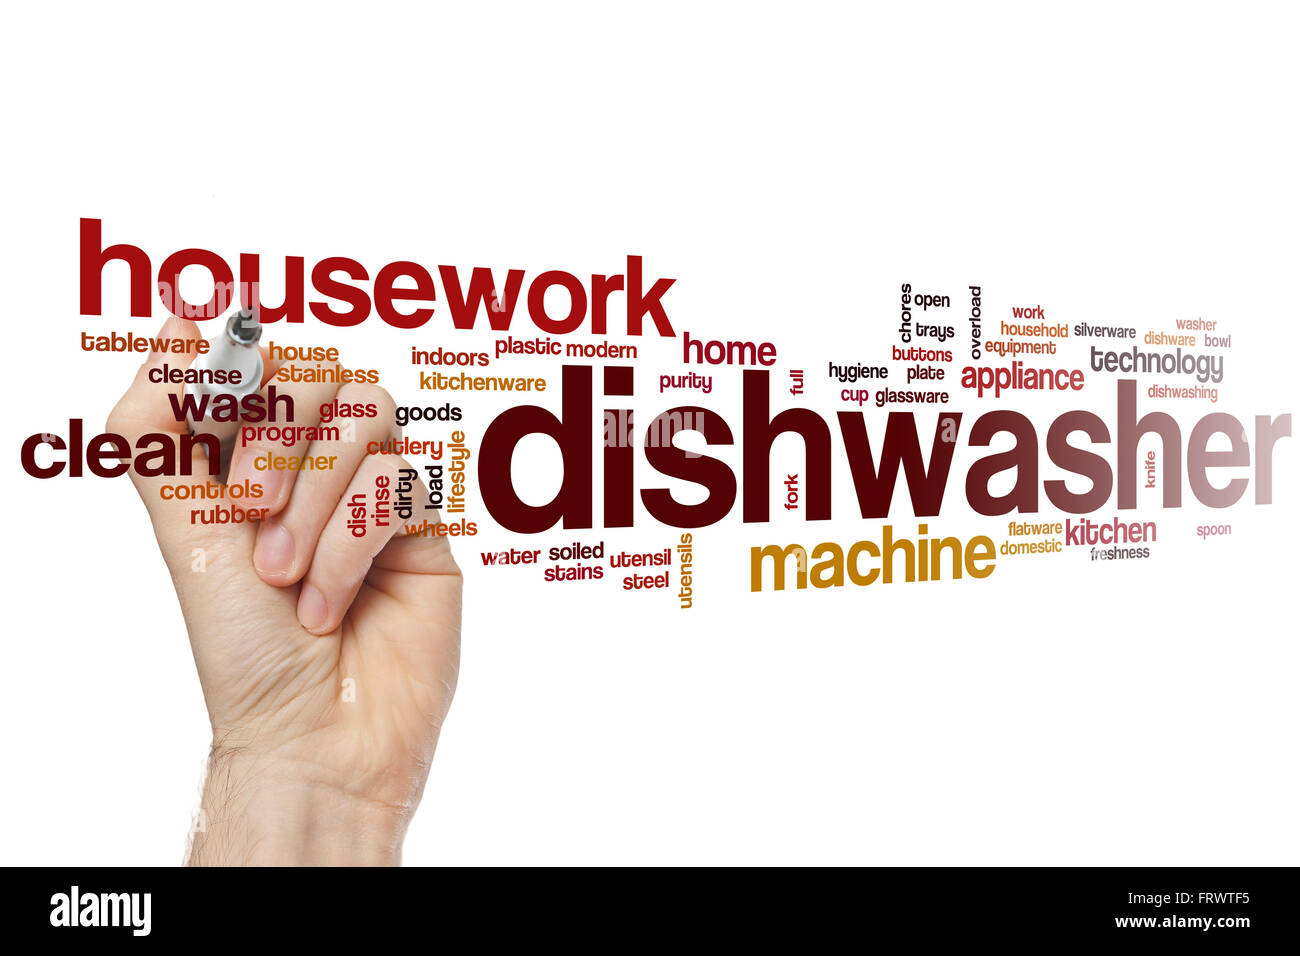 Dishwasher word cloud concept with kitchen appliance related tags Stock Photo